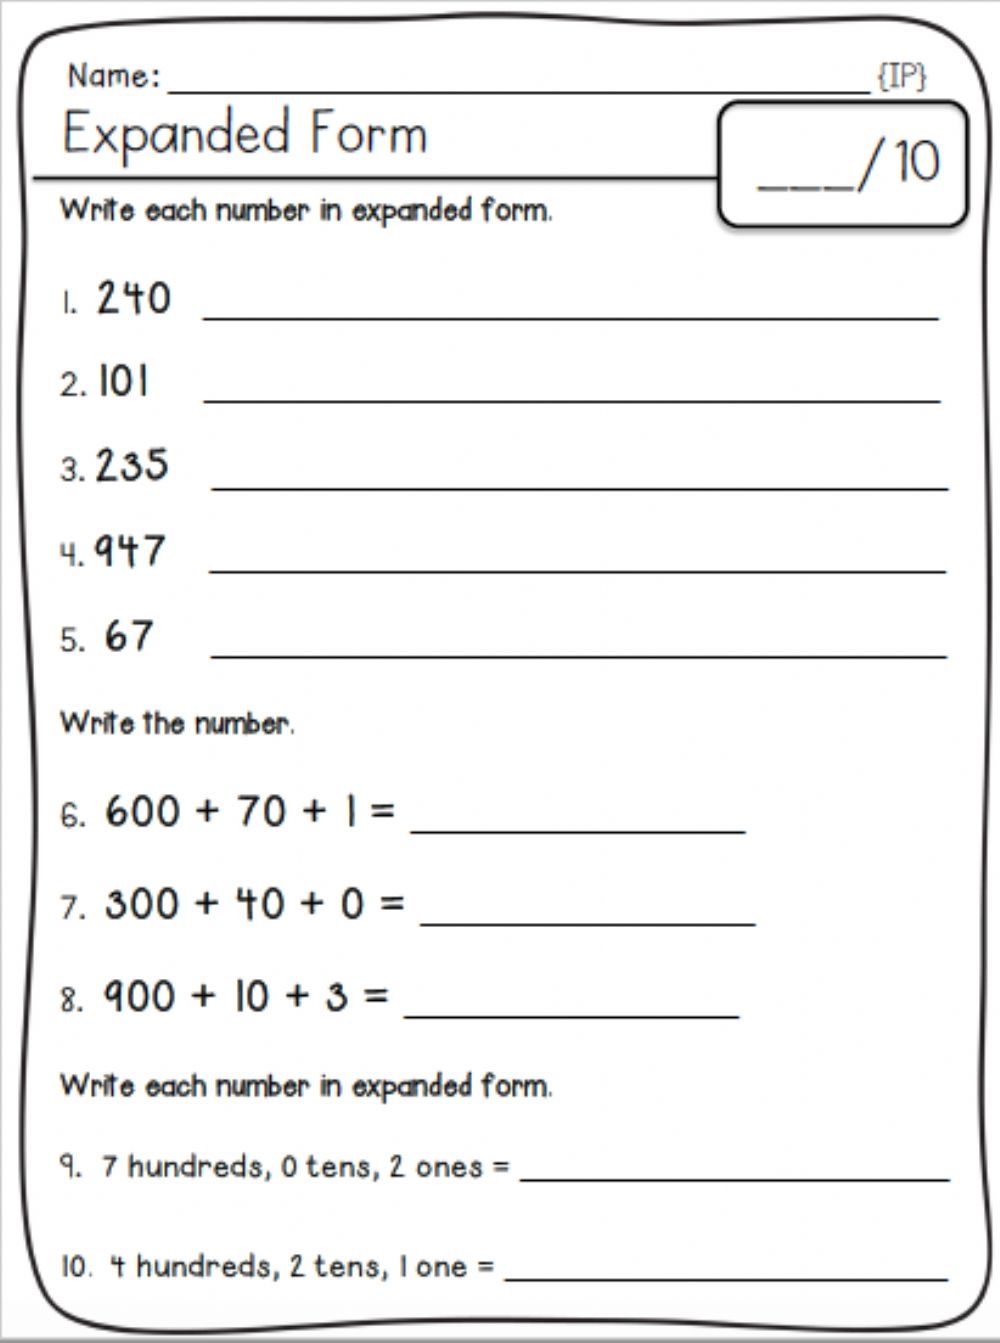 Expanded Form Online Exercise For 2